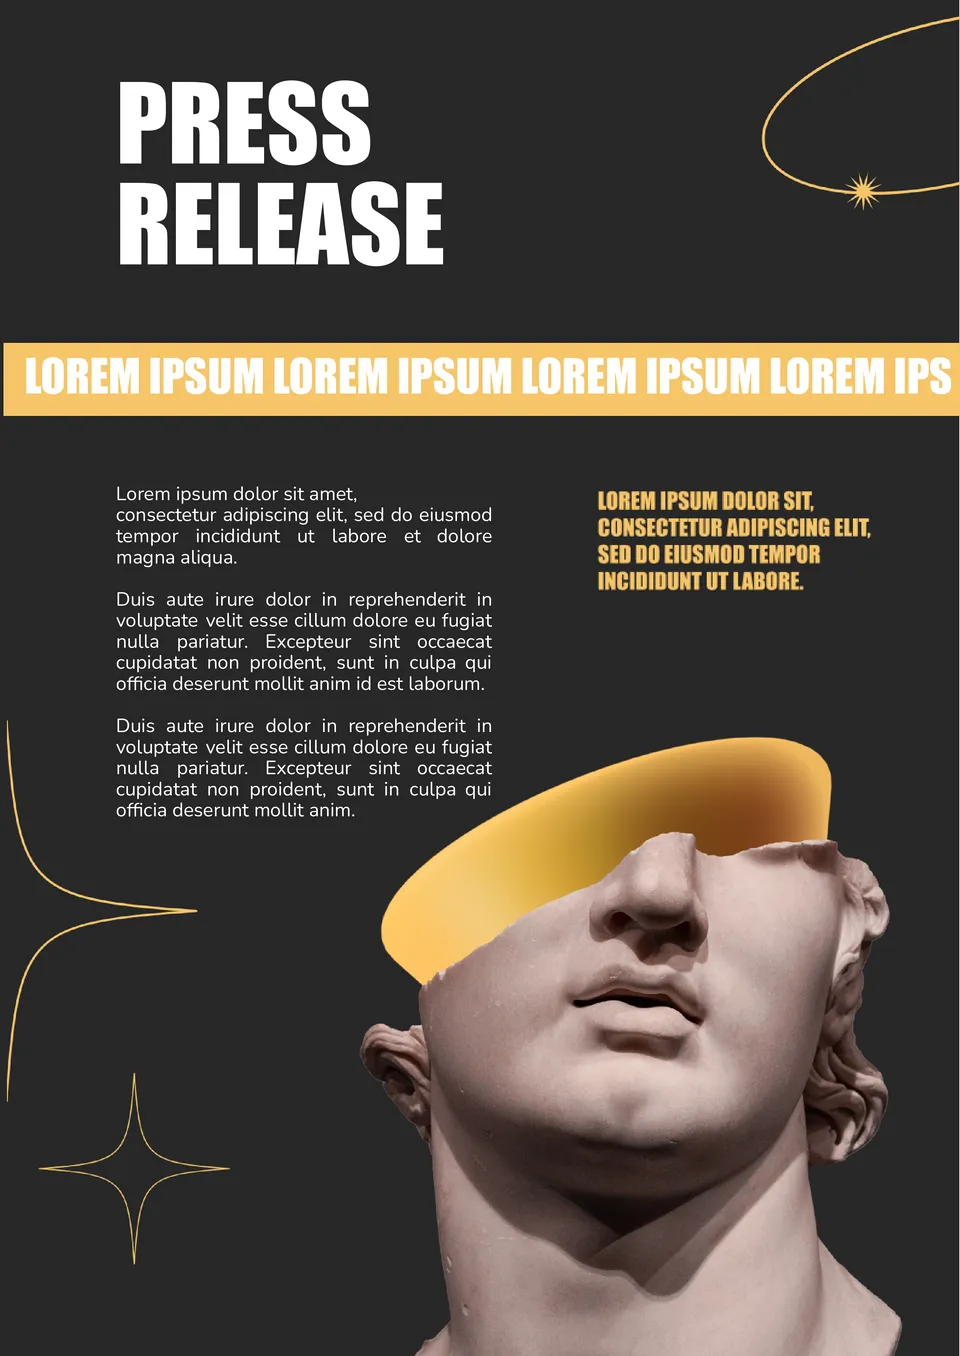 Product Launch Press Release Template